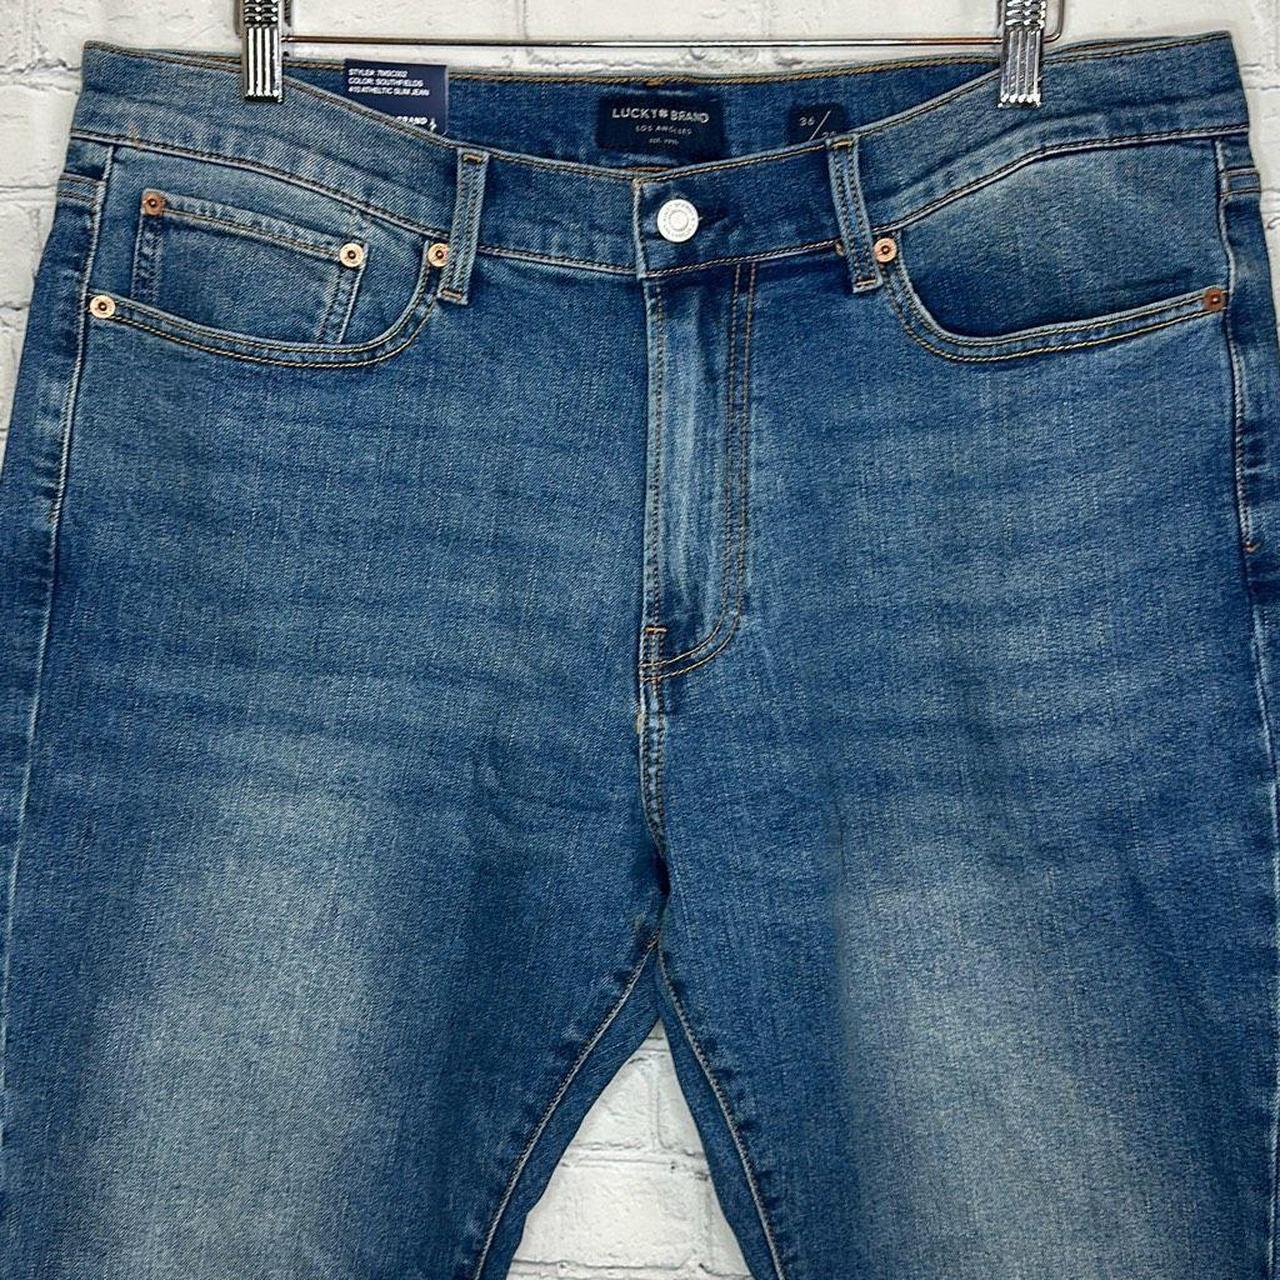 LUCKY BRAND 410 Athletic Fit Mens Stretch Jeans - Depop